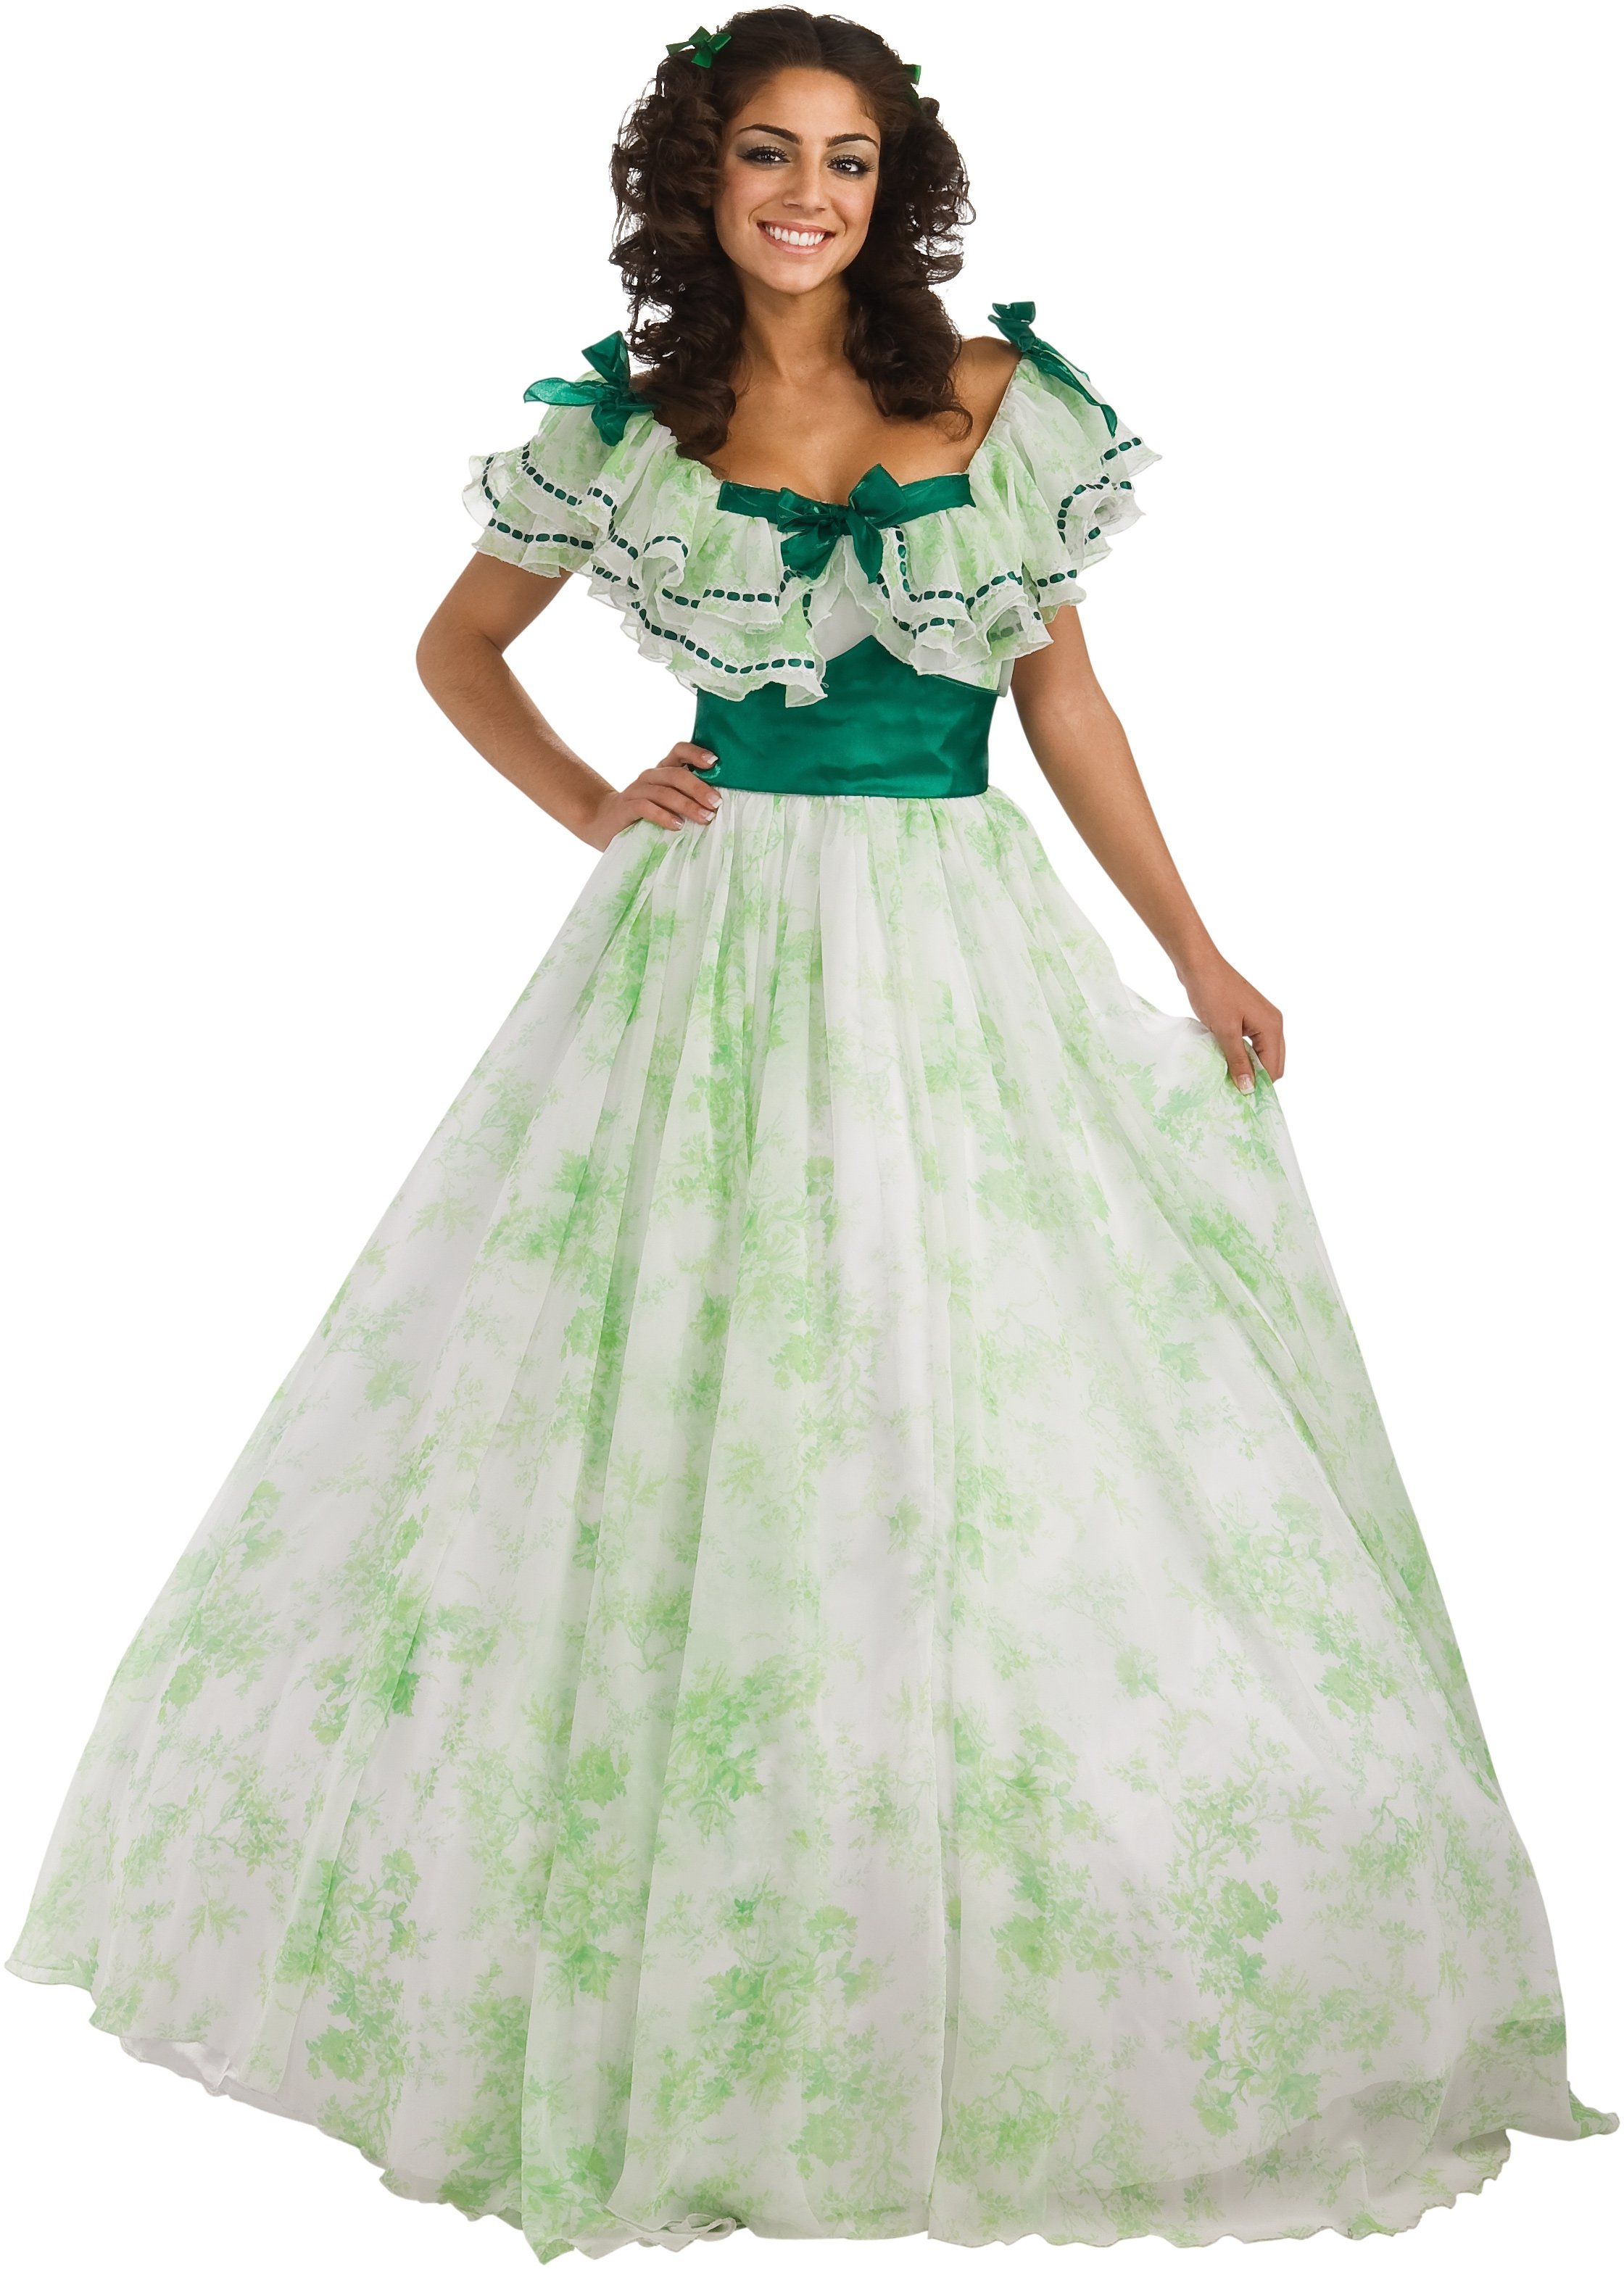 Gone With The Wind - Scarlett Picnic Dress Adult Costume - Click Image to Close